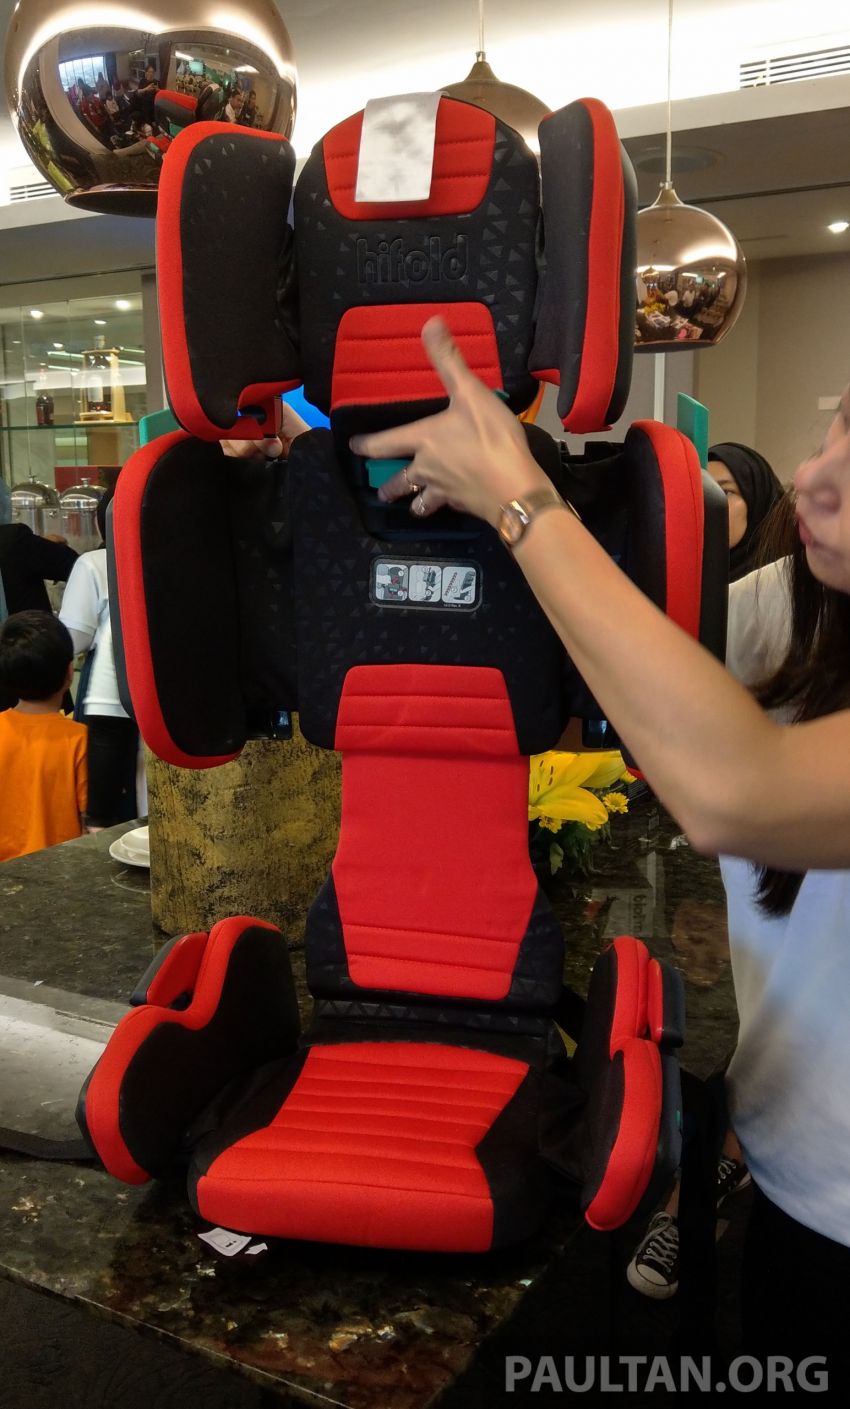 mifold child booster seat range expands in Malaysia with Sport and hifold  models – from RM199 to RM699 1060504